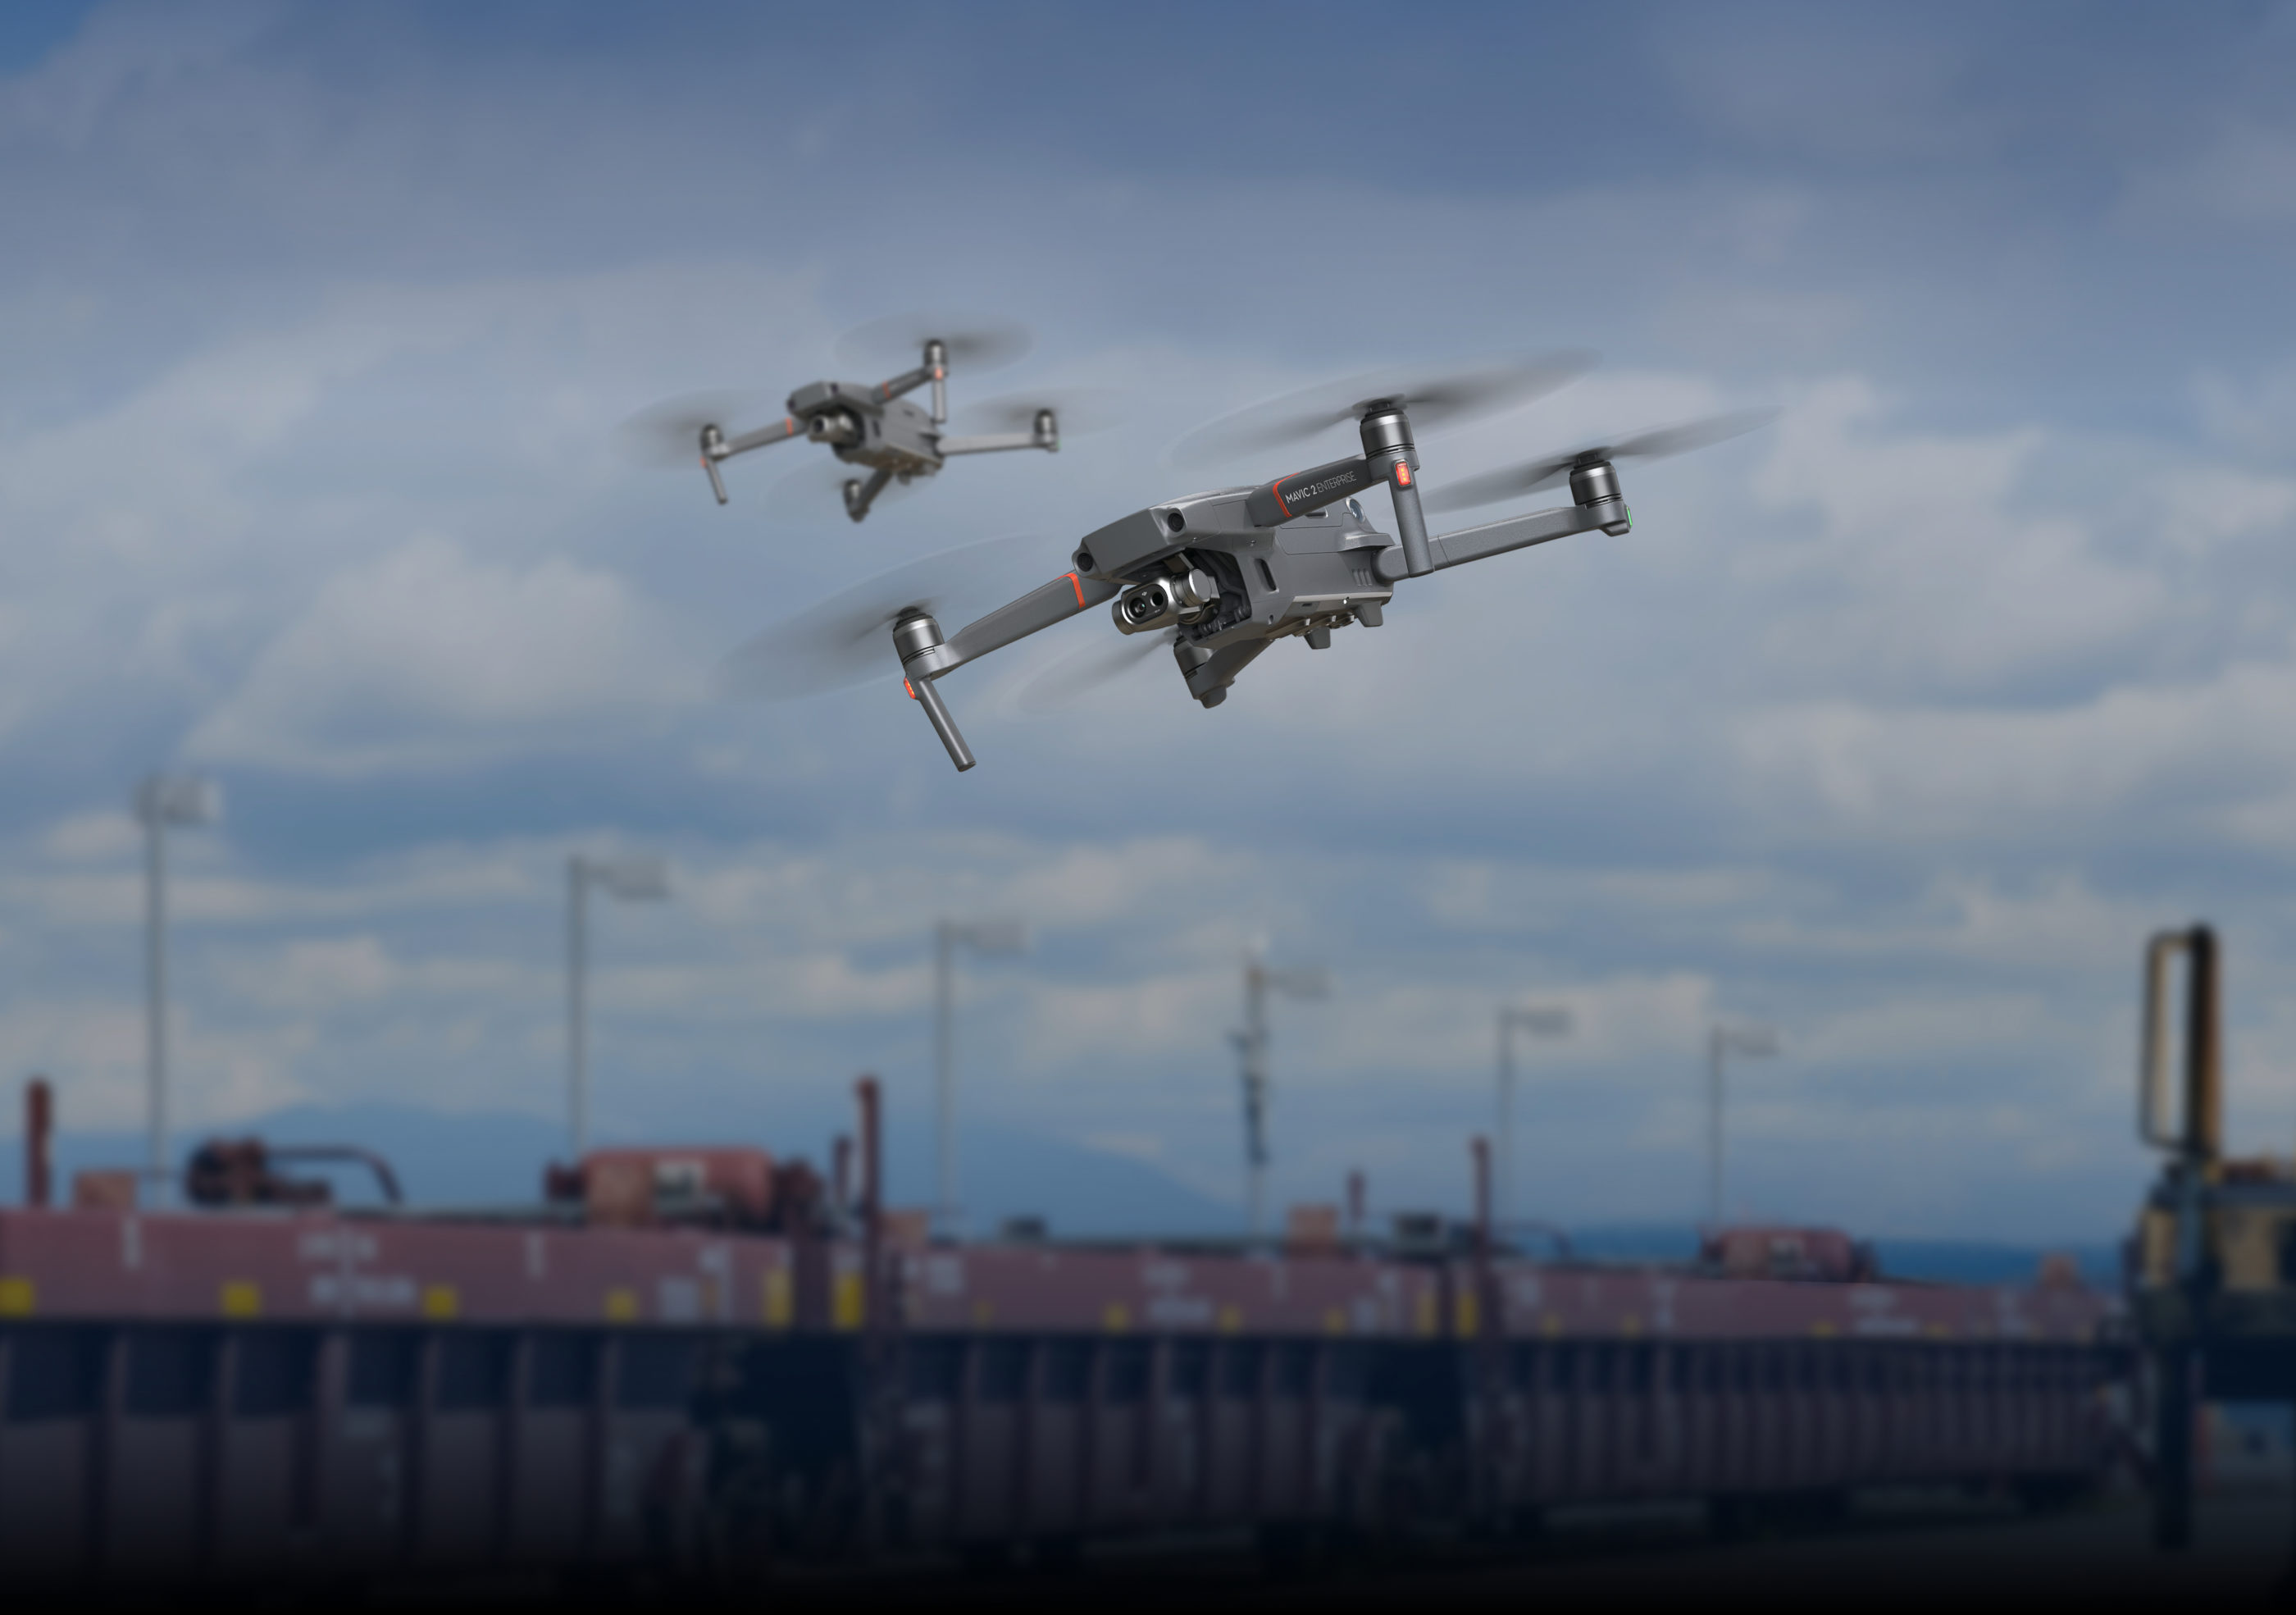 The DJI Mavic 2 Enterprise Dual with Thermal by FLIR will help bring thermal imaging capabilities to more first responders, industrial operators, and law enforcement personnel. FLIR Image